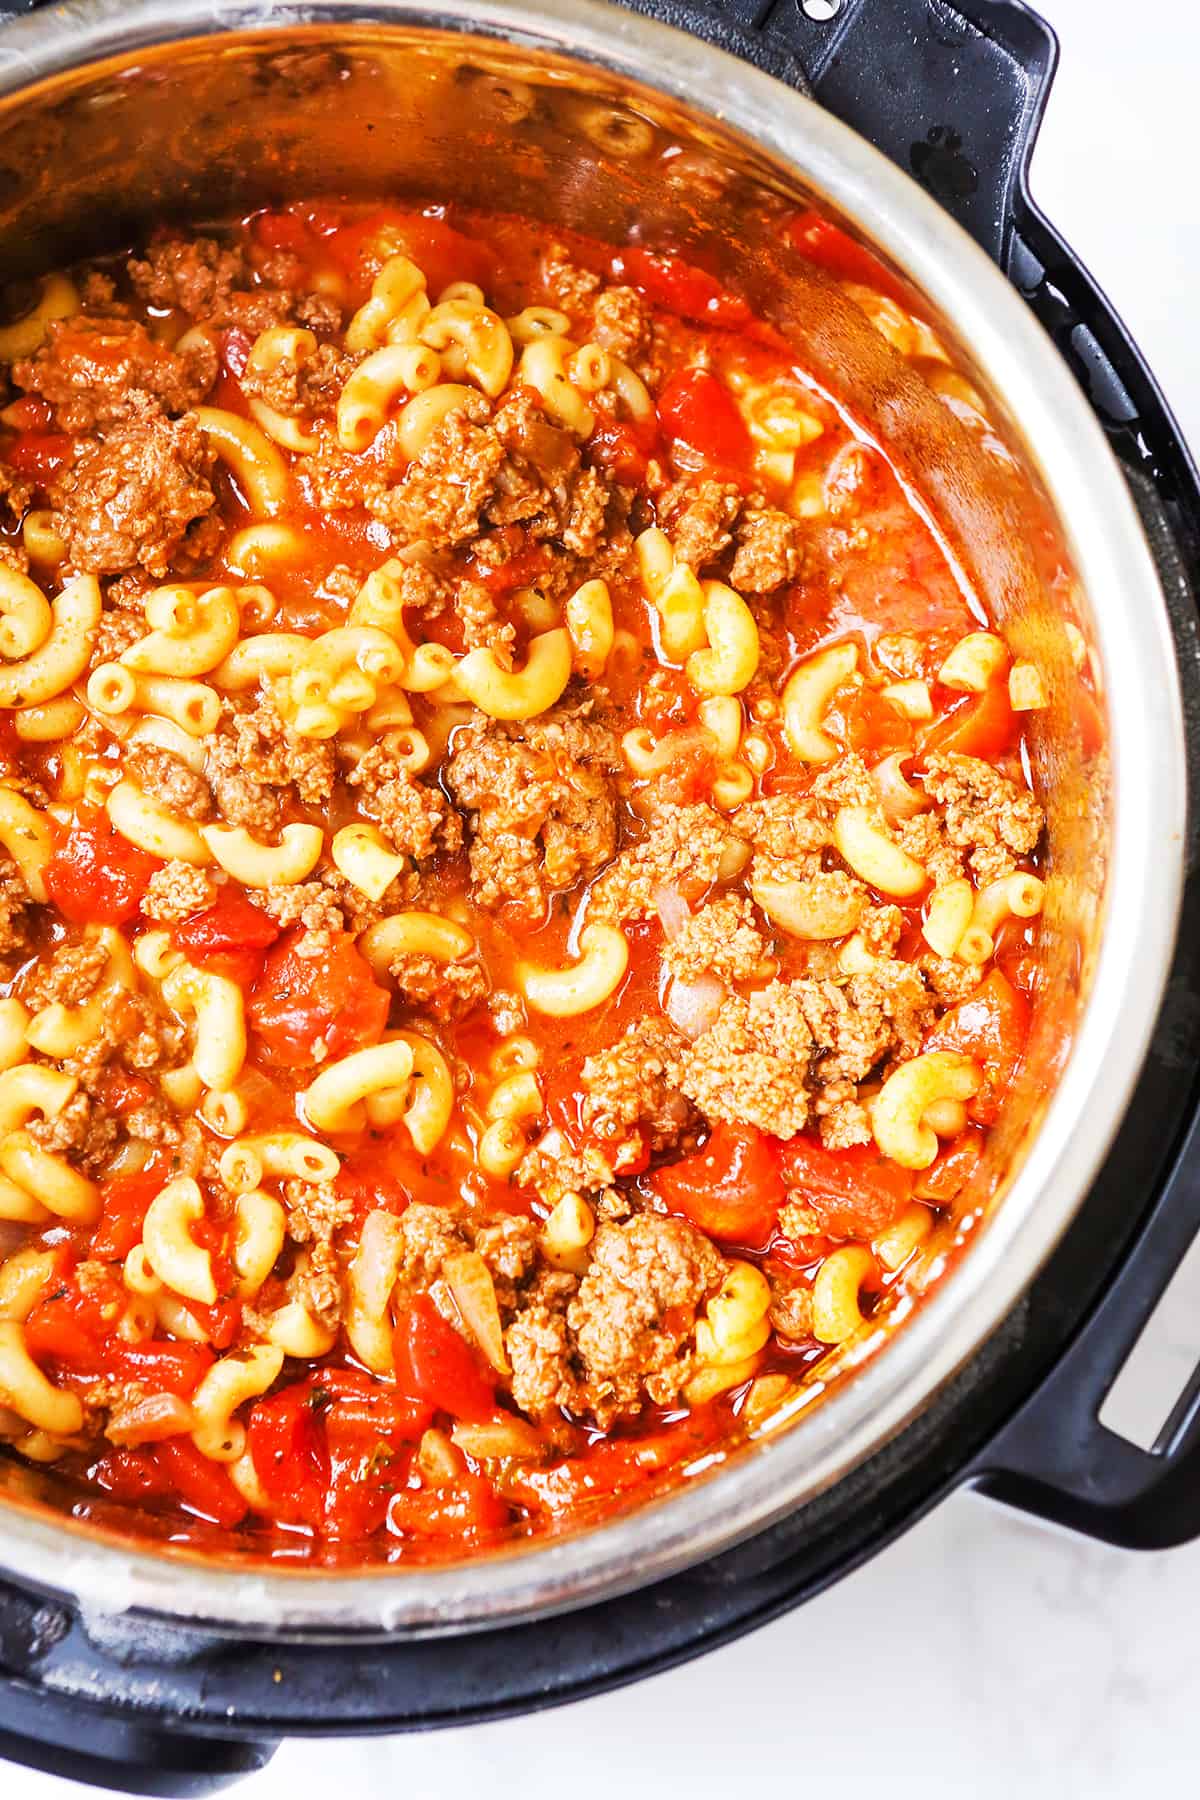 Top view of Instant Pot filled with cooked American Goulash.